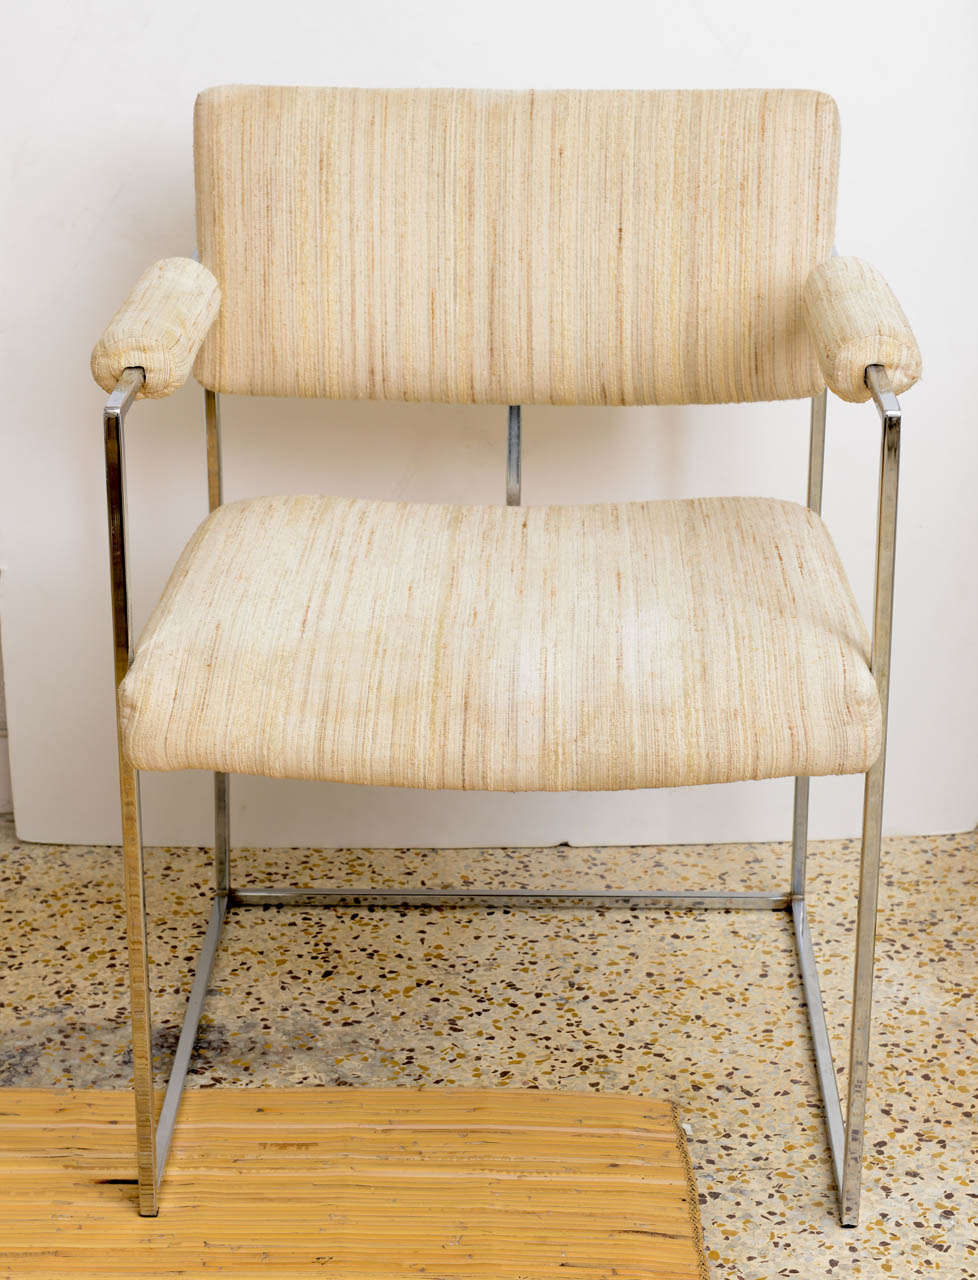 This set of armchairs were designed by the iconic designer Milo Baughman in the 1970s and are from his 